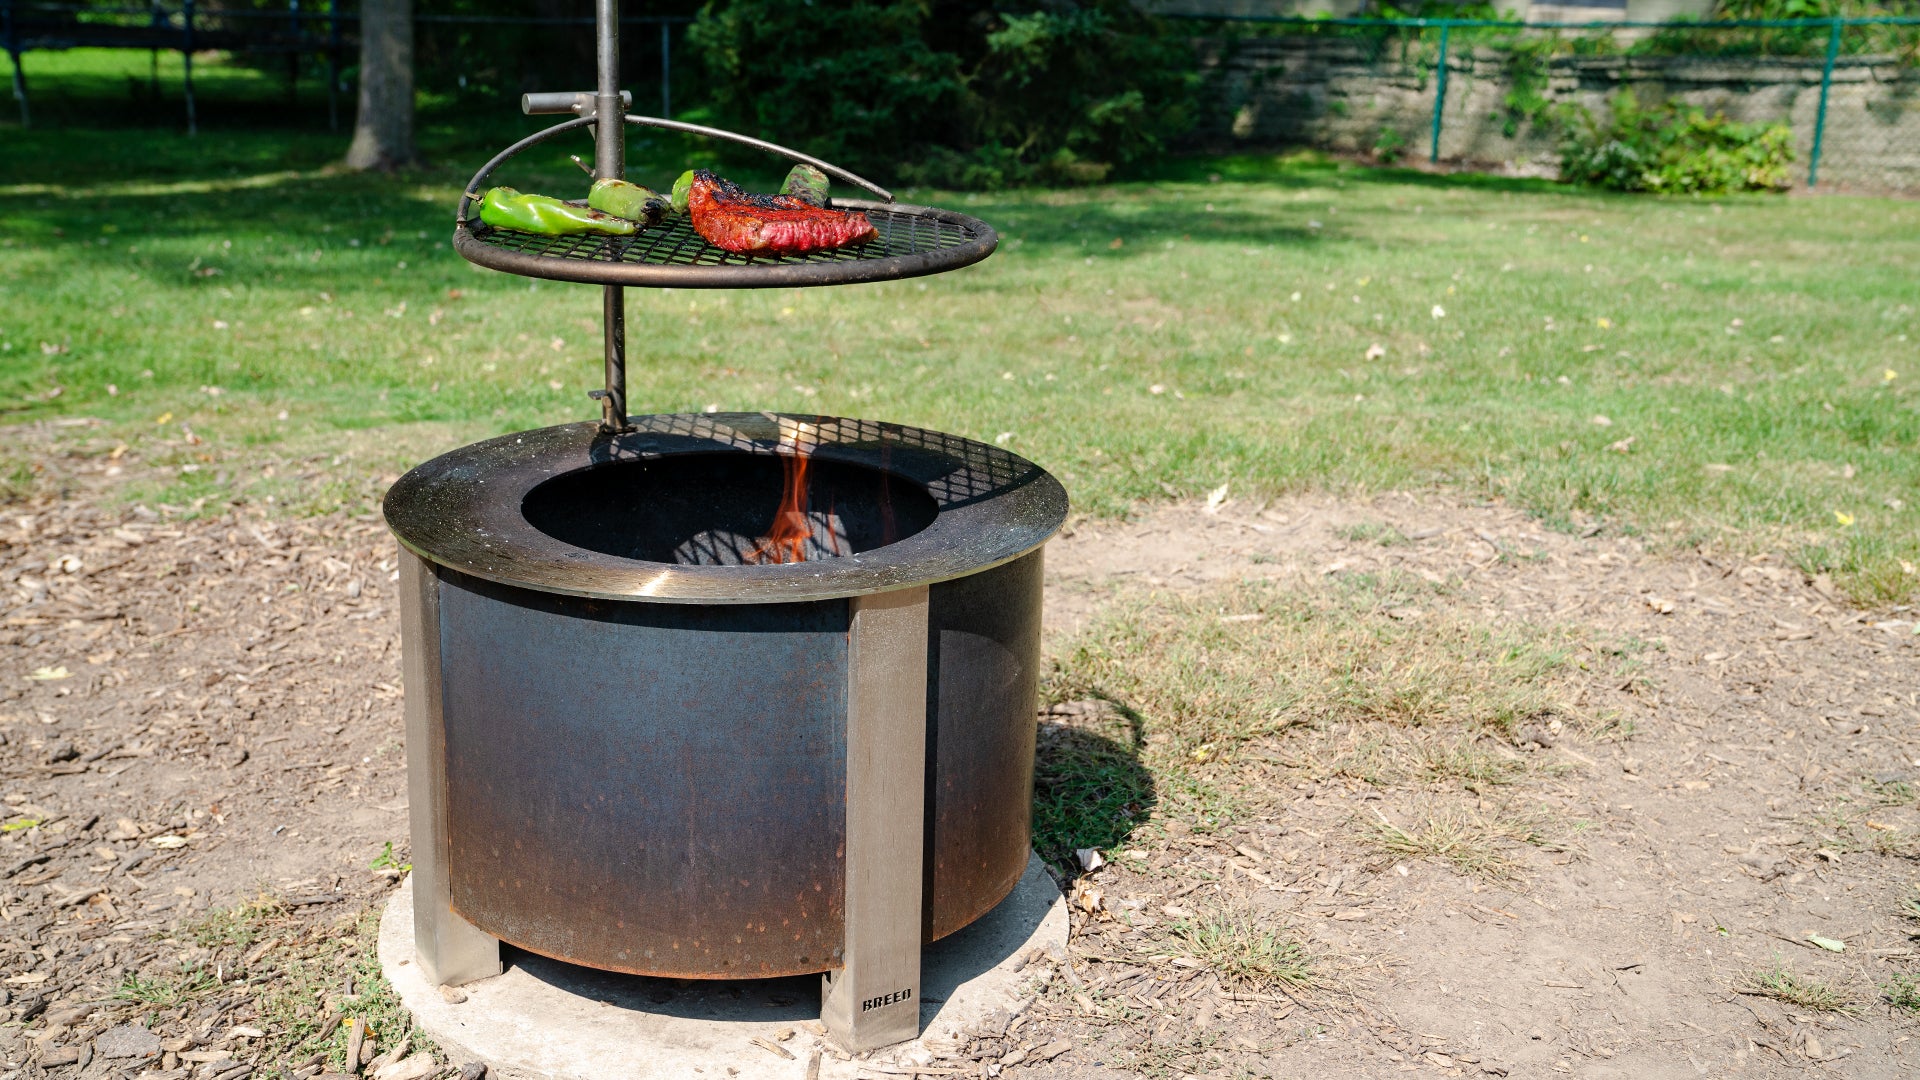 Breeo X Series Smokeless Fire Pit, Washer Tub Fire Pit Reddit